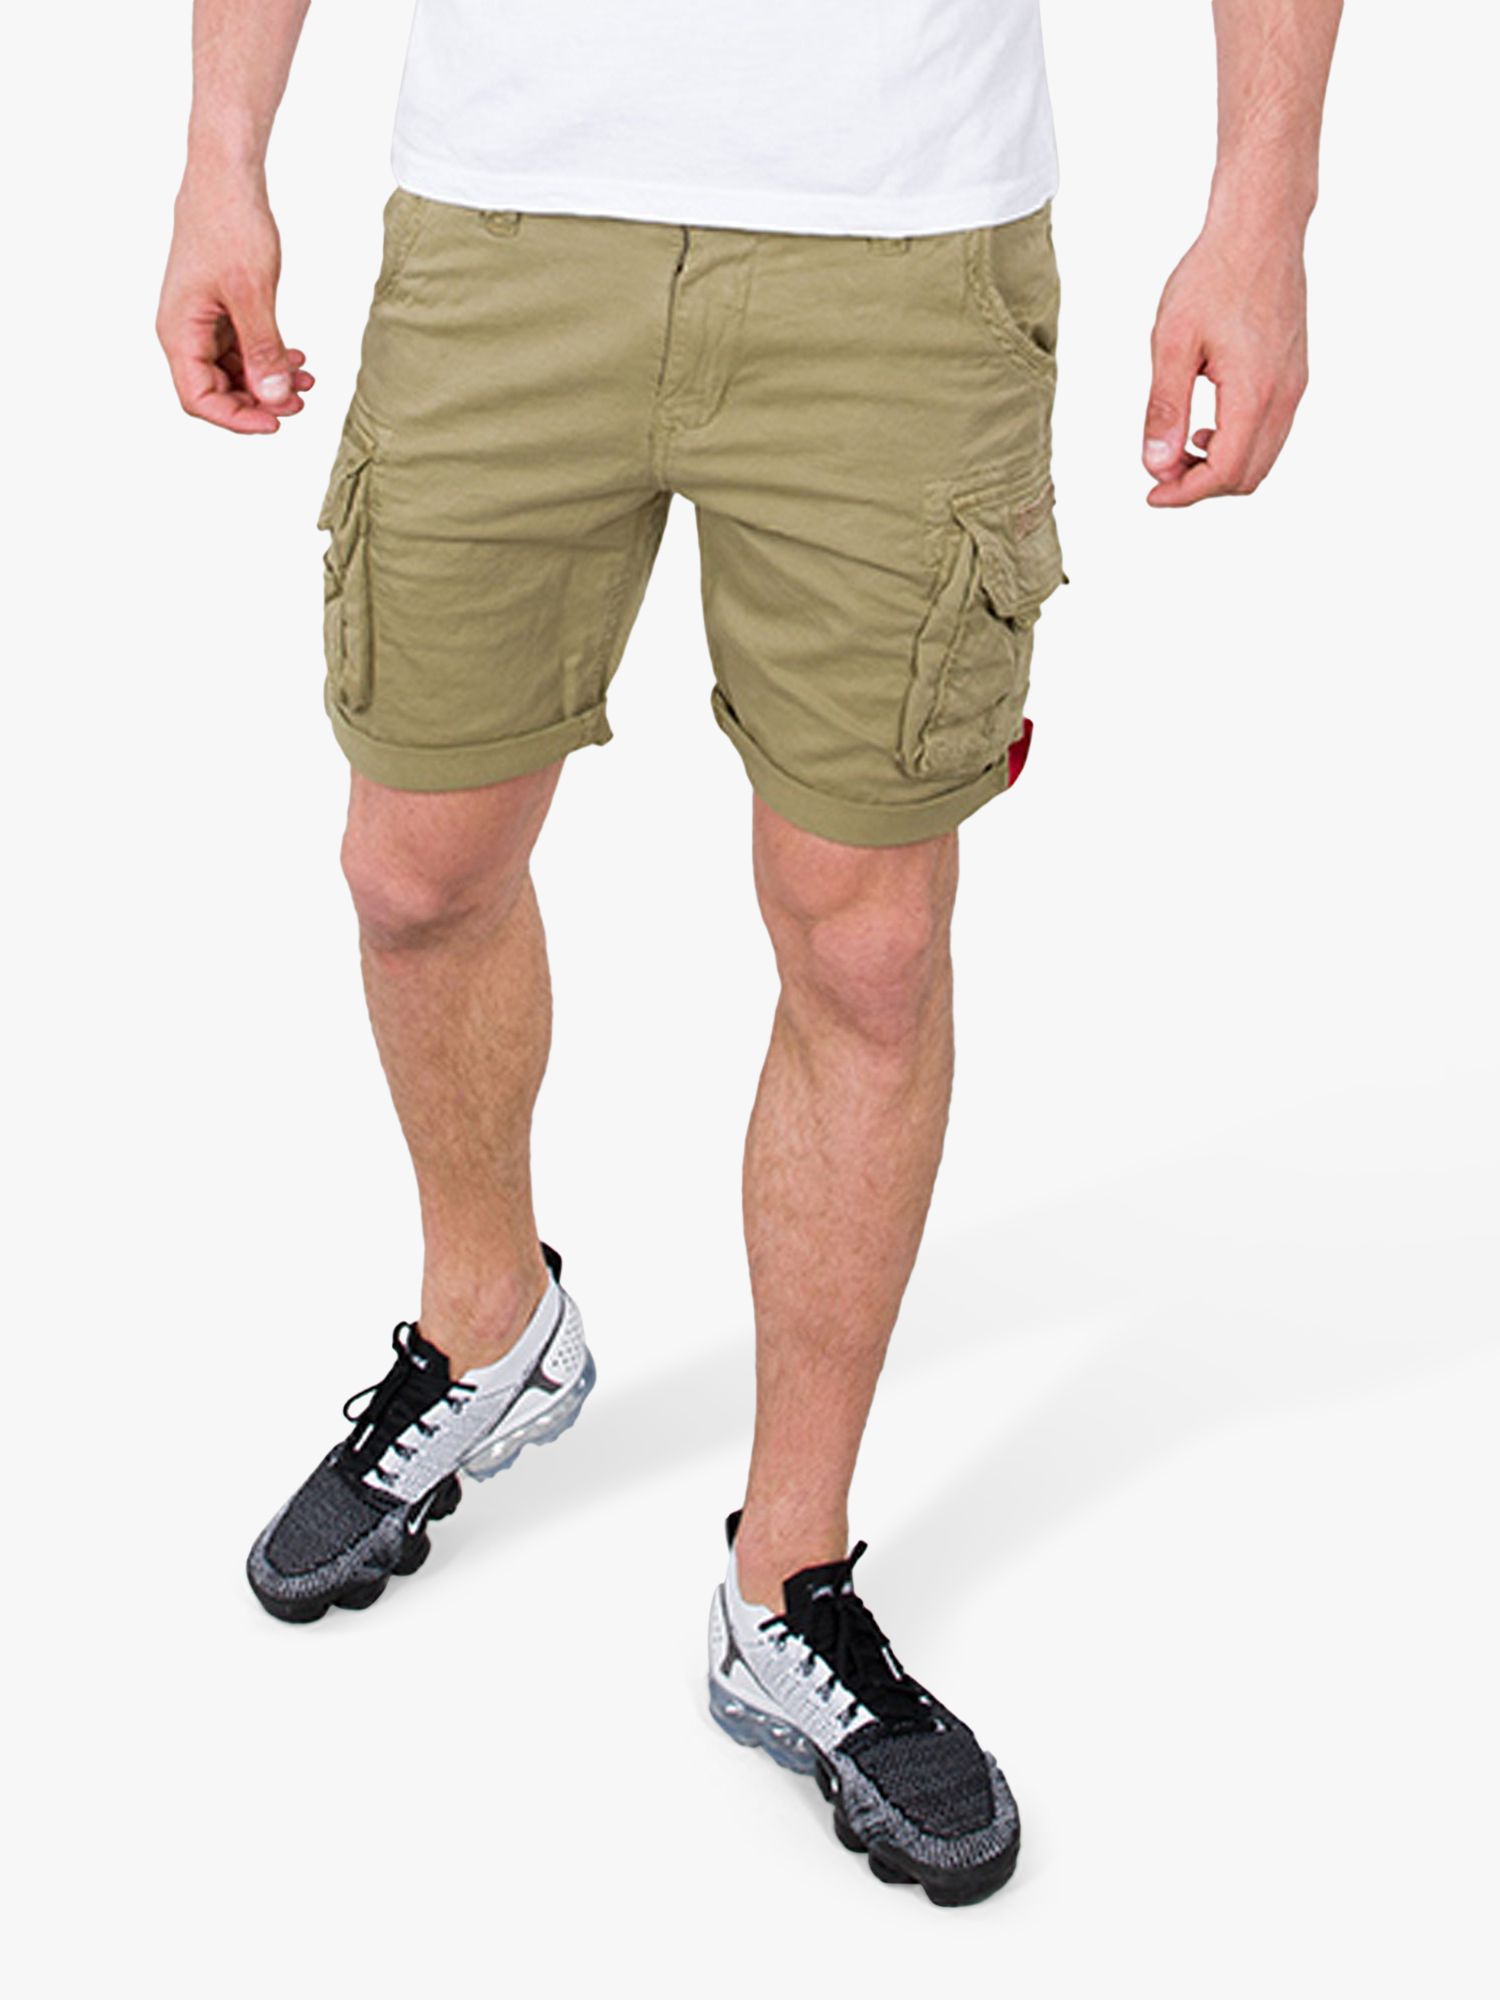 Crew John Olive 82 Alpha Cargo Partners at & Lewis Shorts, Industries Light